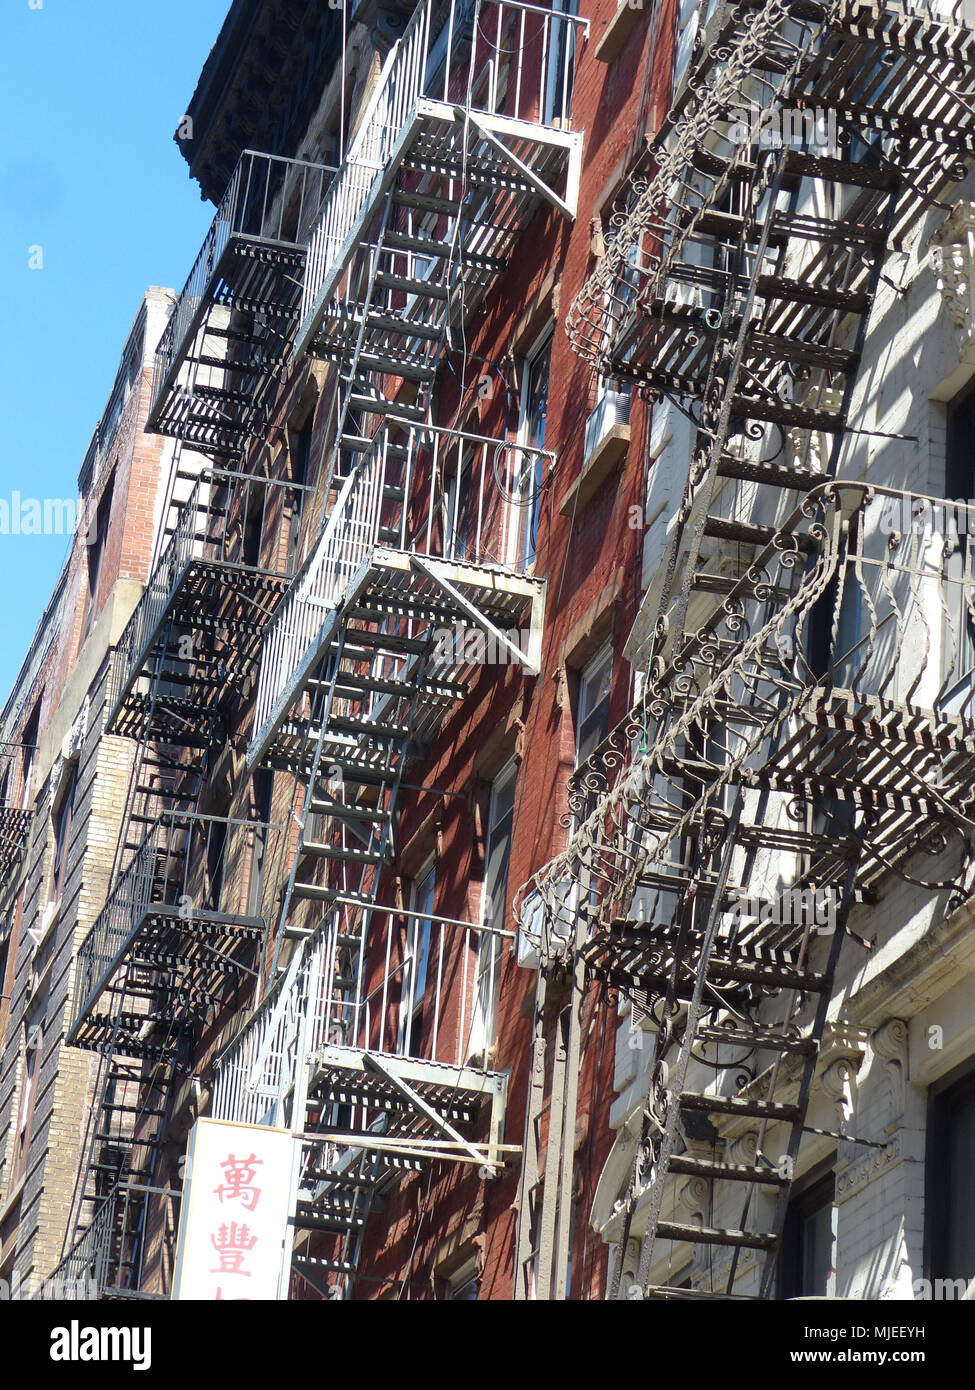 A fire escape of a building in New York City Stock Photo